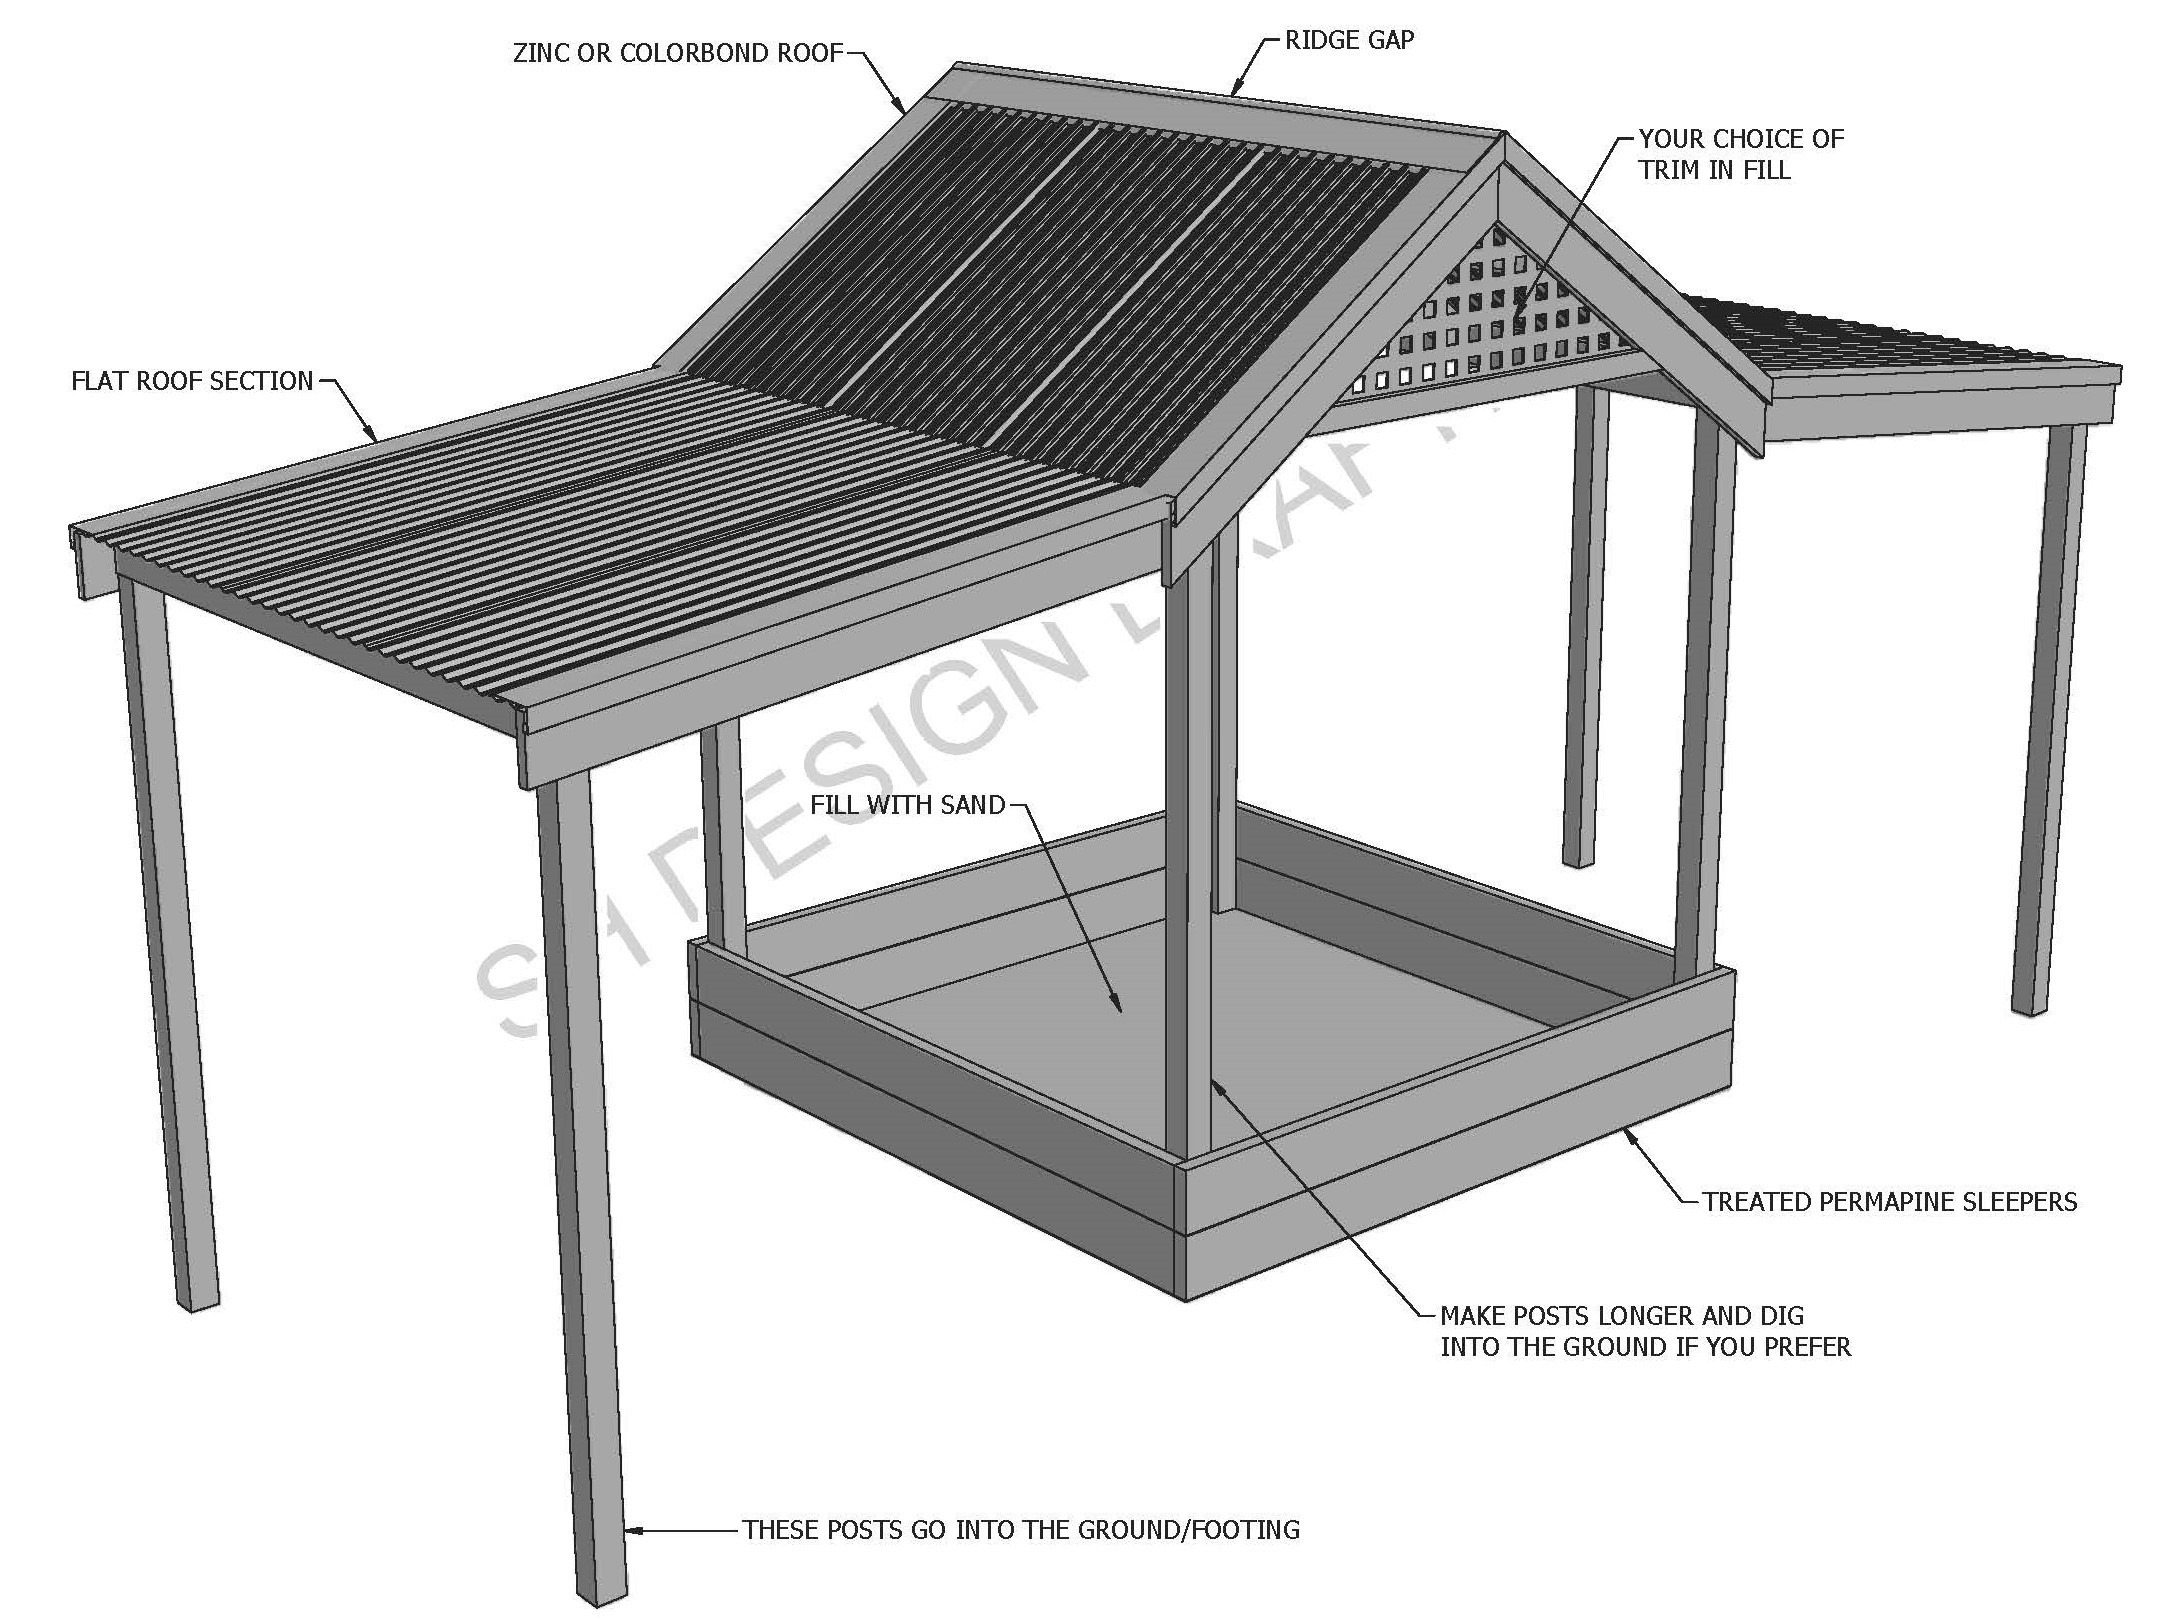 SAND PIT V02 with Verandahs for Shade from Sun and Rain